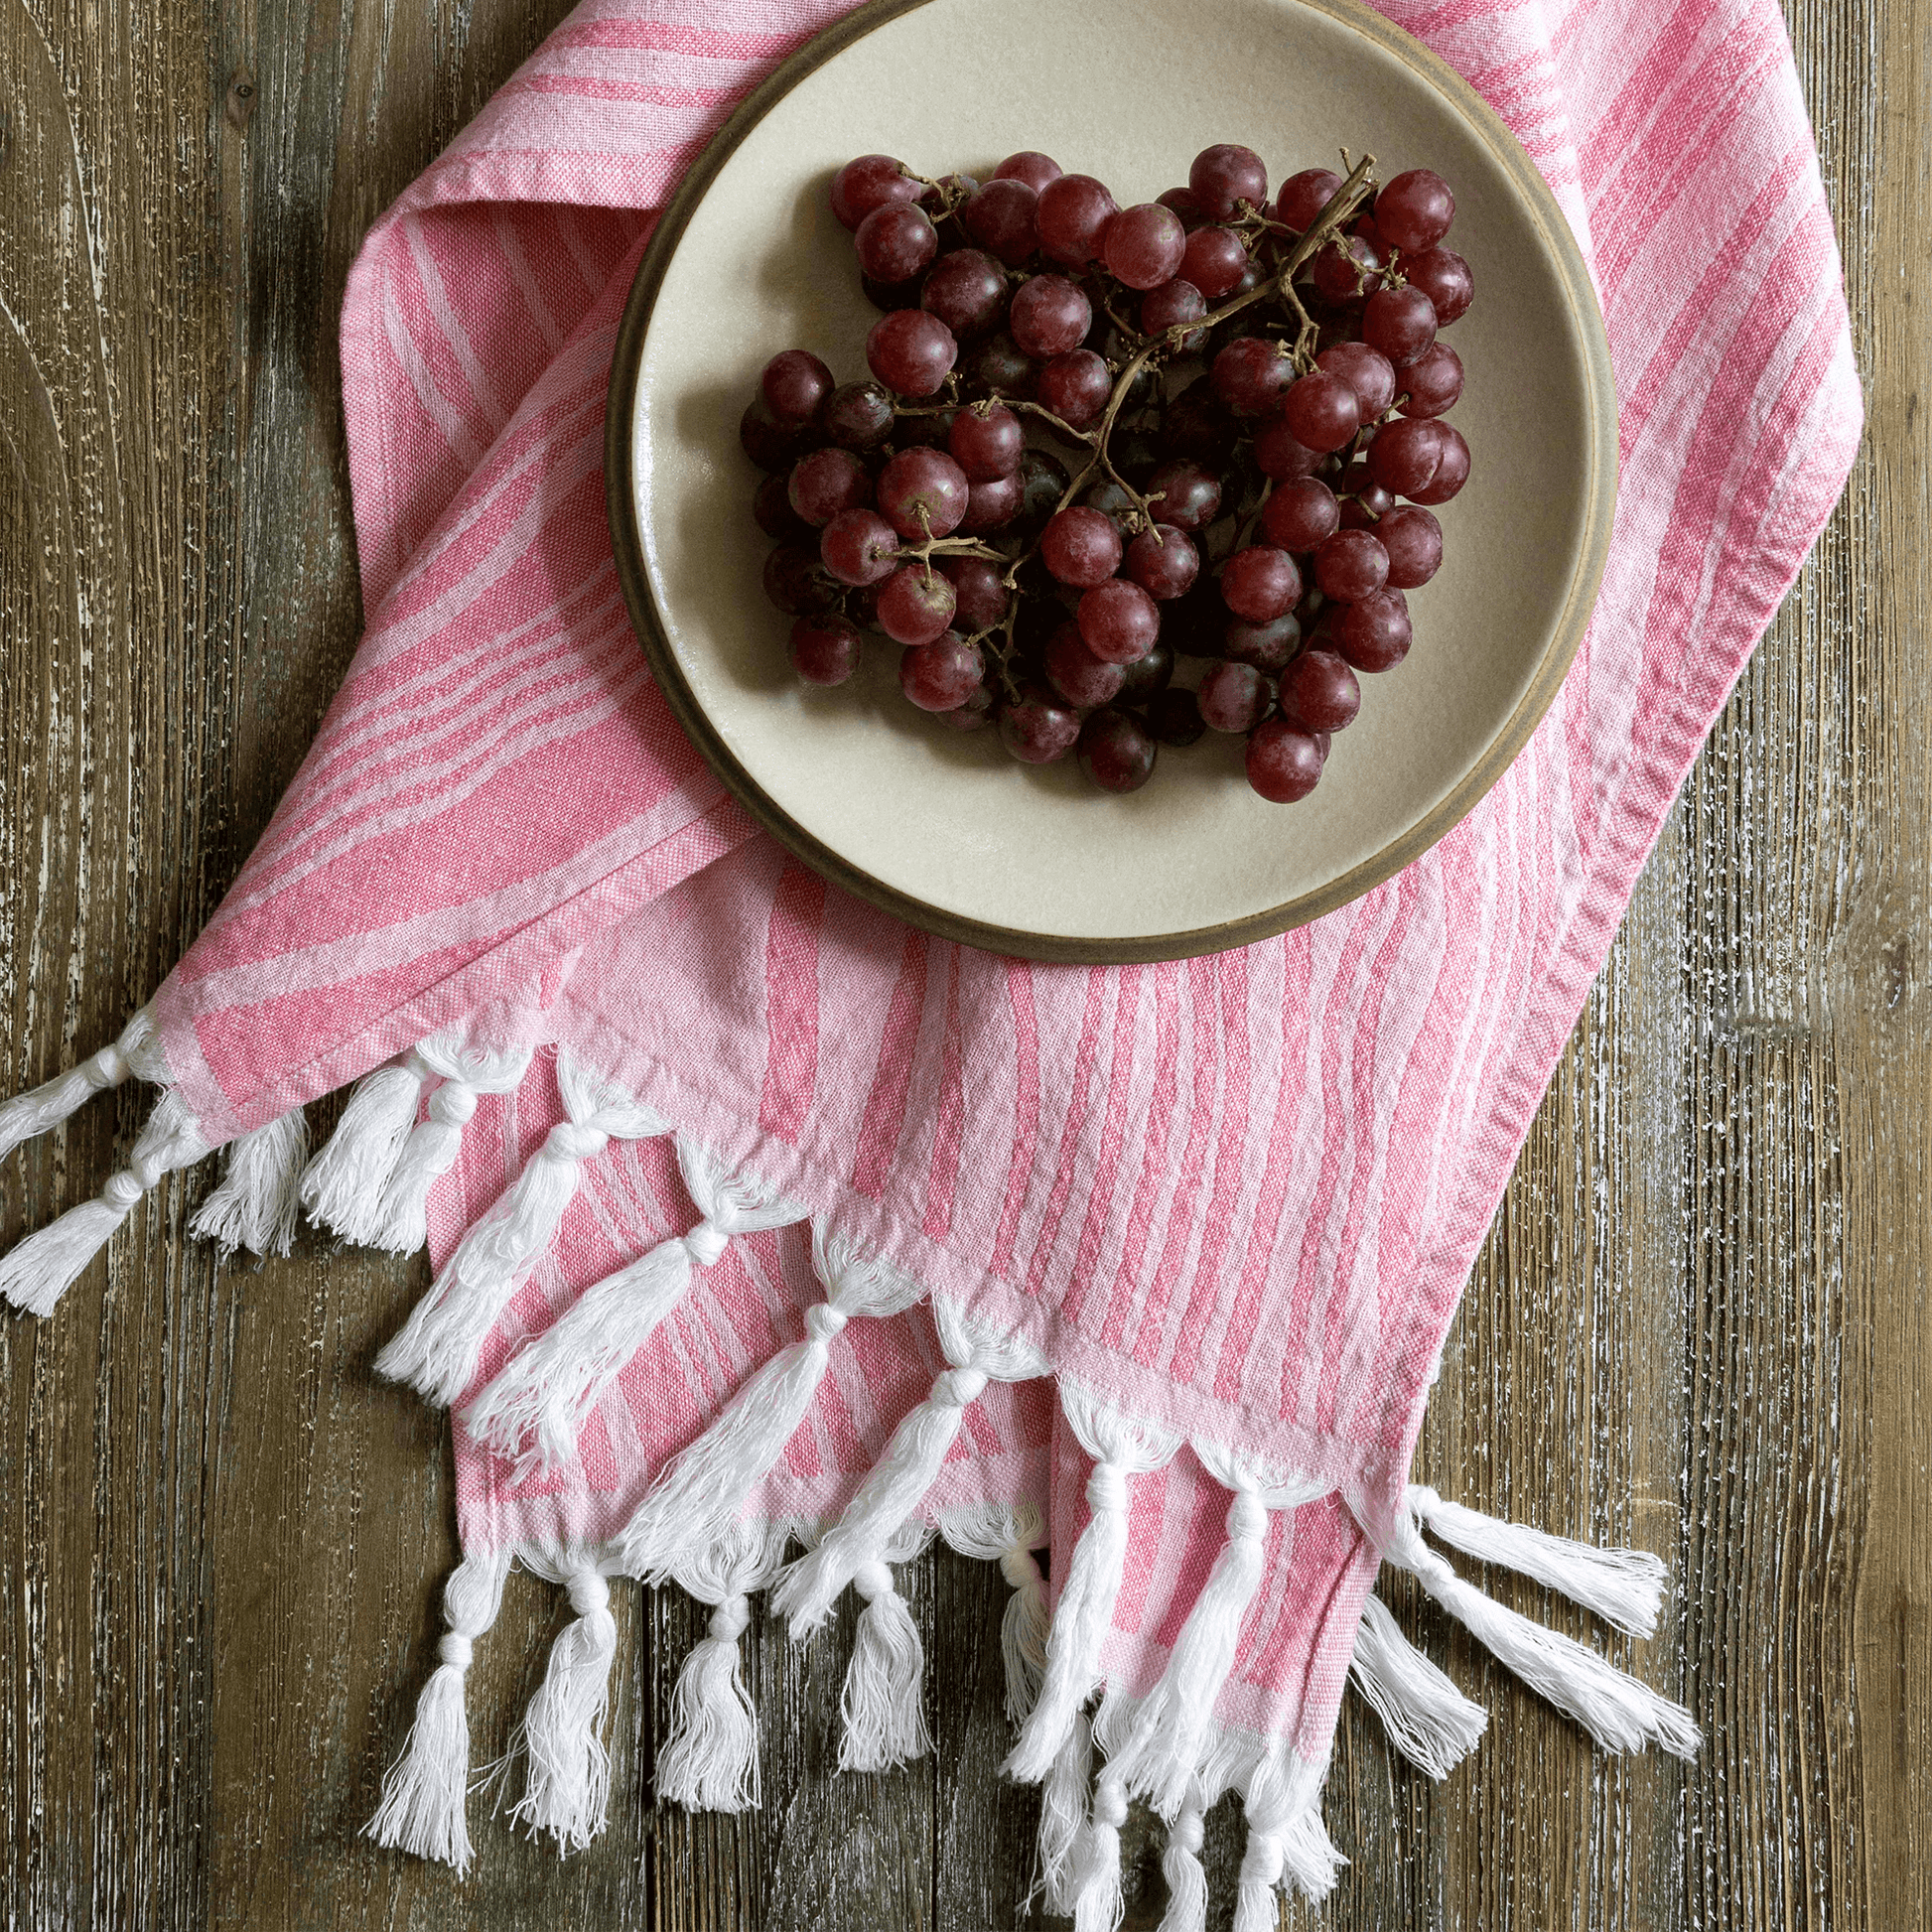 Turkish Cotton Hand Towel  Wave Stripes in Pink Coral